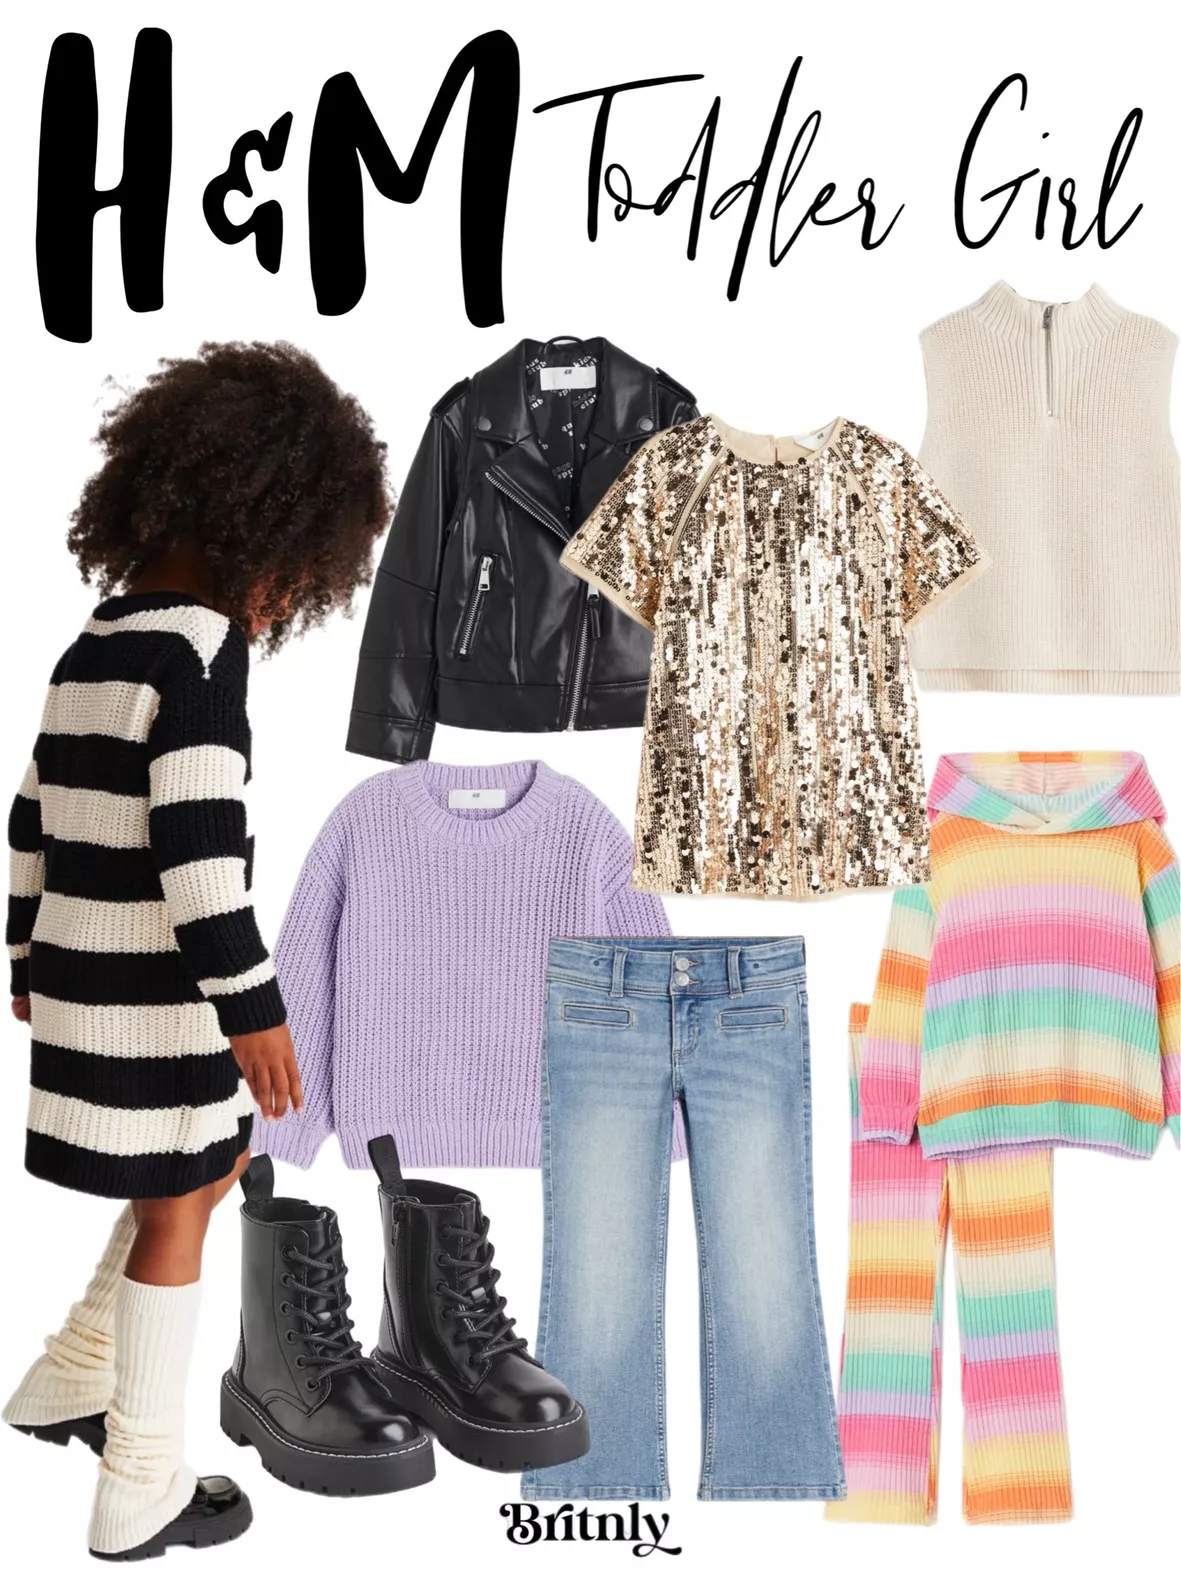 Cute Basic Kids' Clothes From H&M